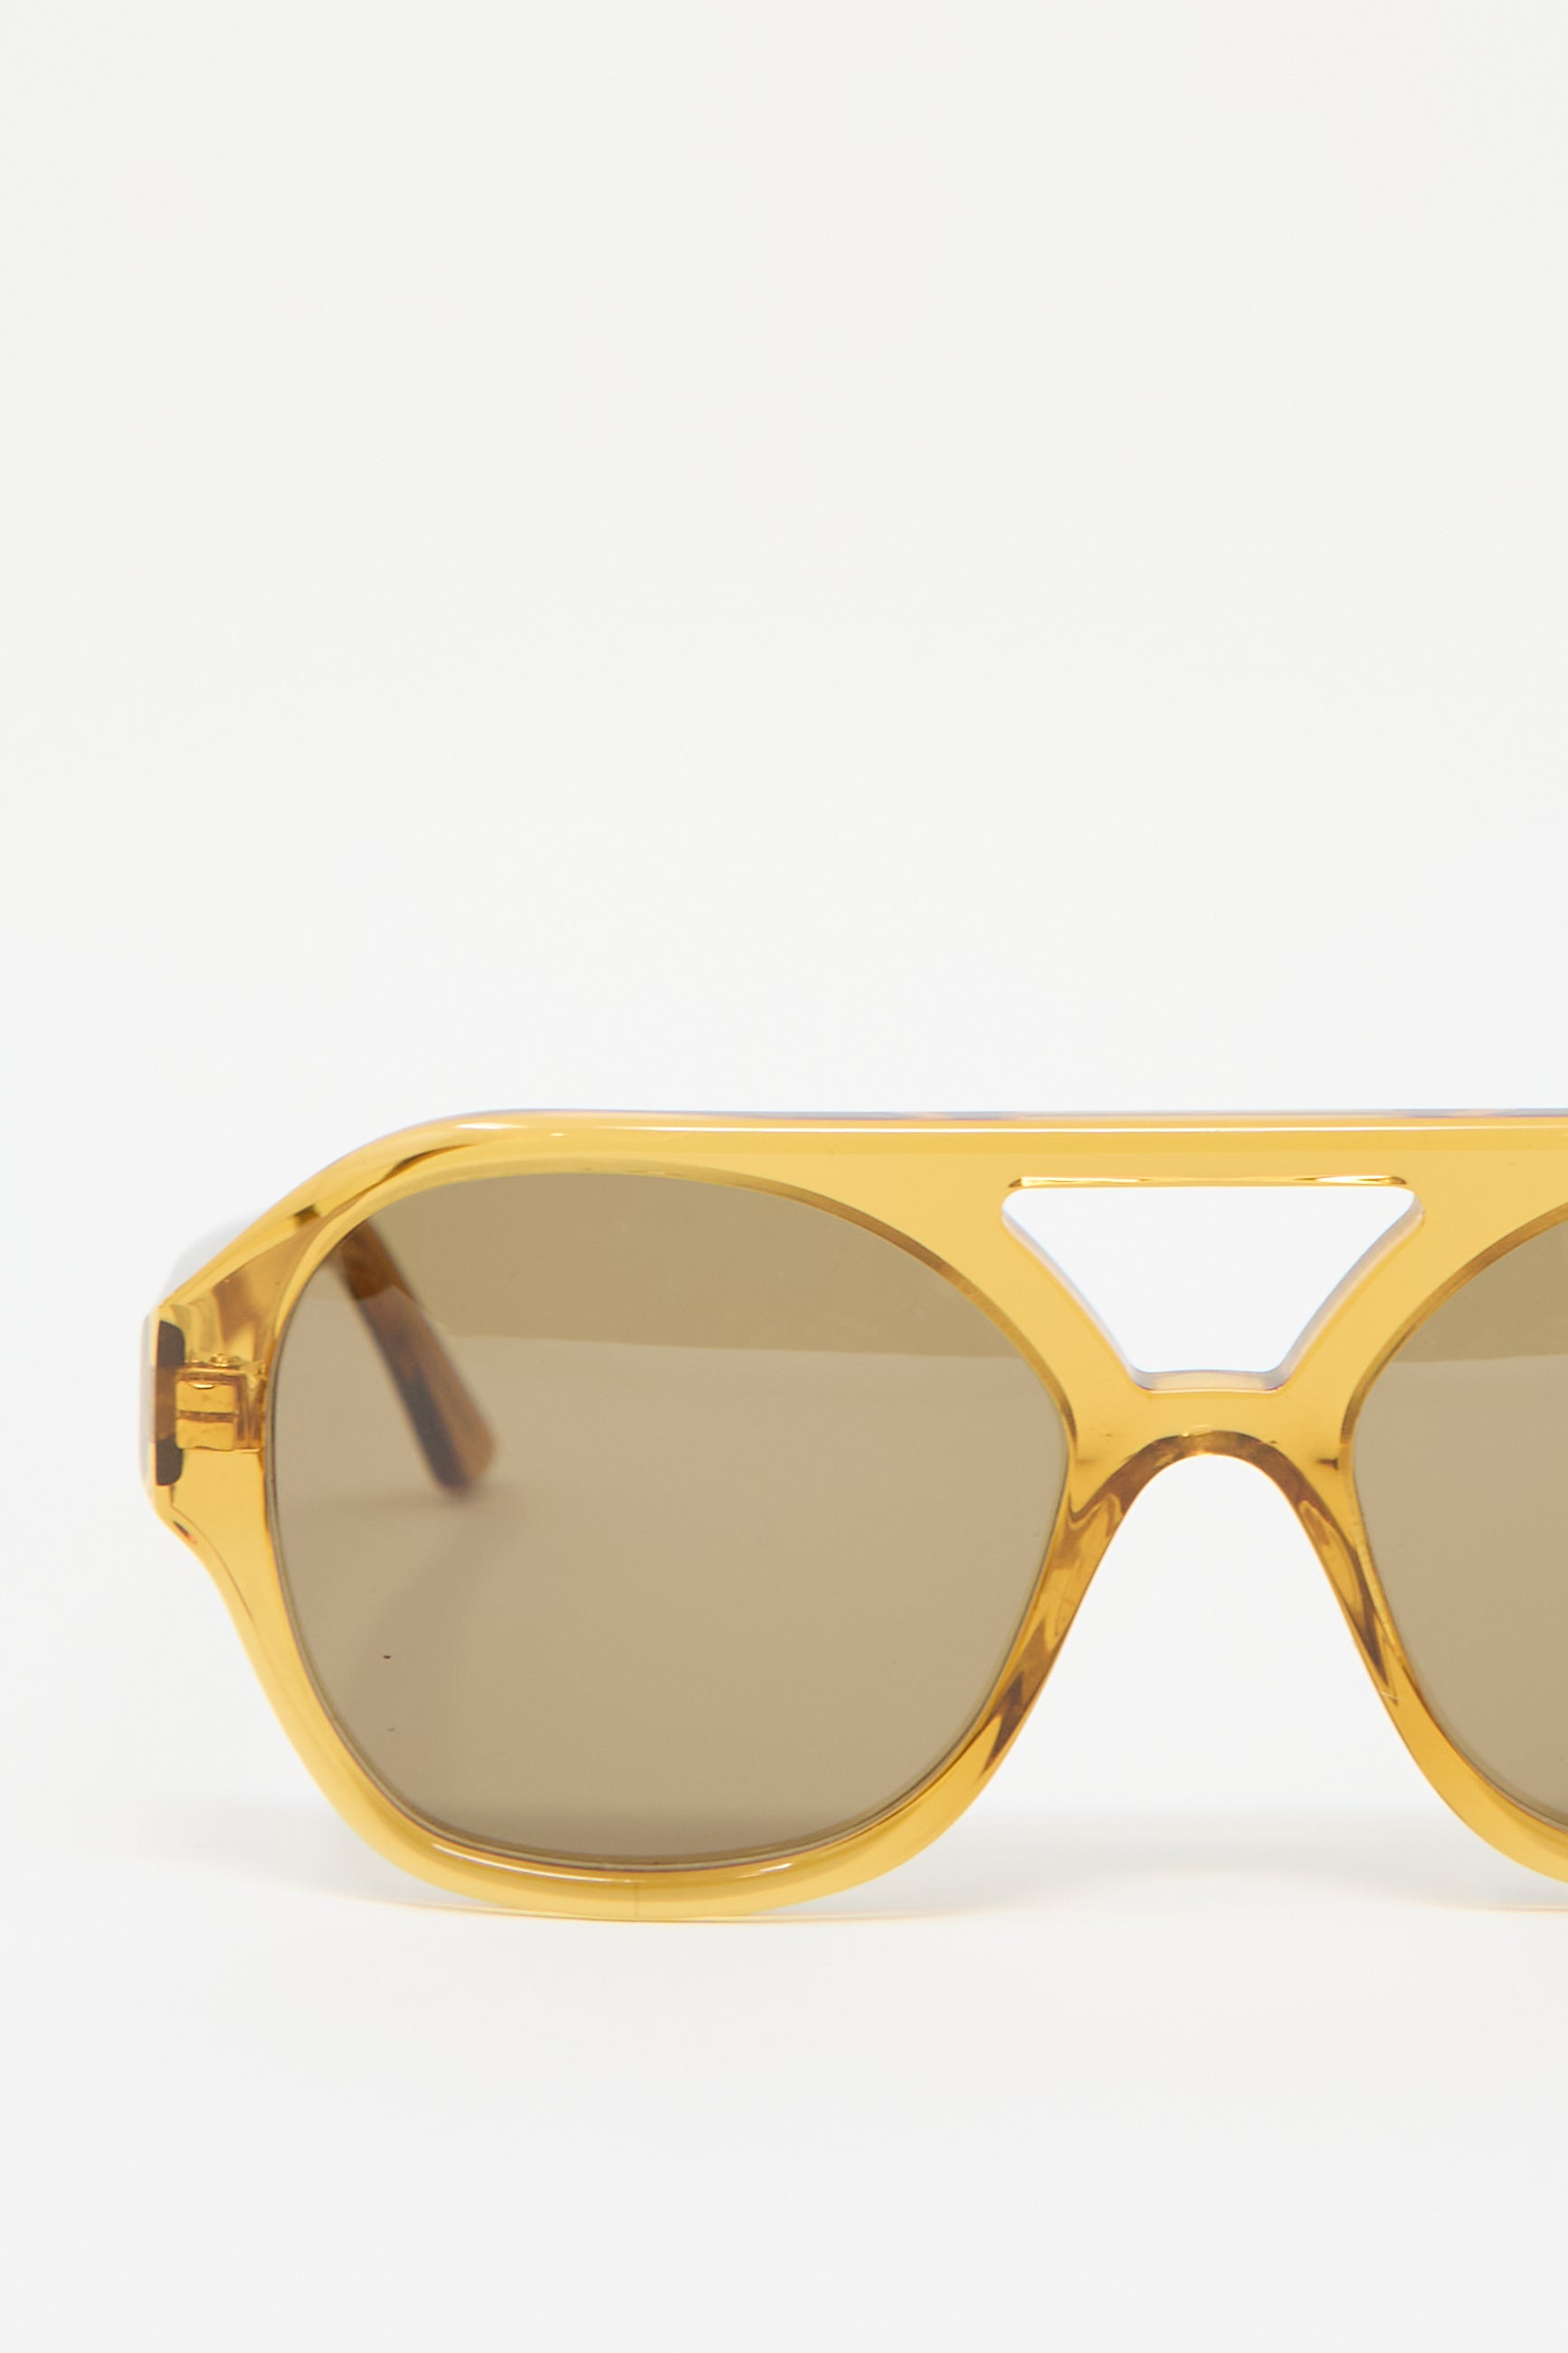 The Eva Masaki Chiyo Aviator Sunglasses in Honey feature an oversized hexagonal frame crafted from Italian acetate; showcasing a yellow, translucent finish and brown tinted lenses that offer 100% UV protection, all set against a plain white background.